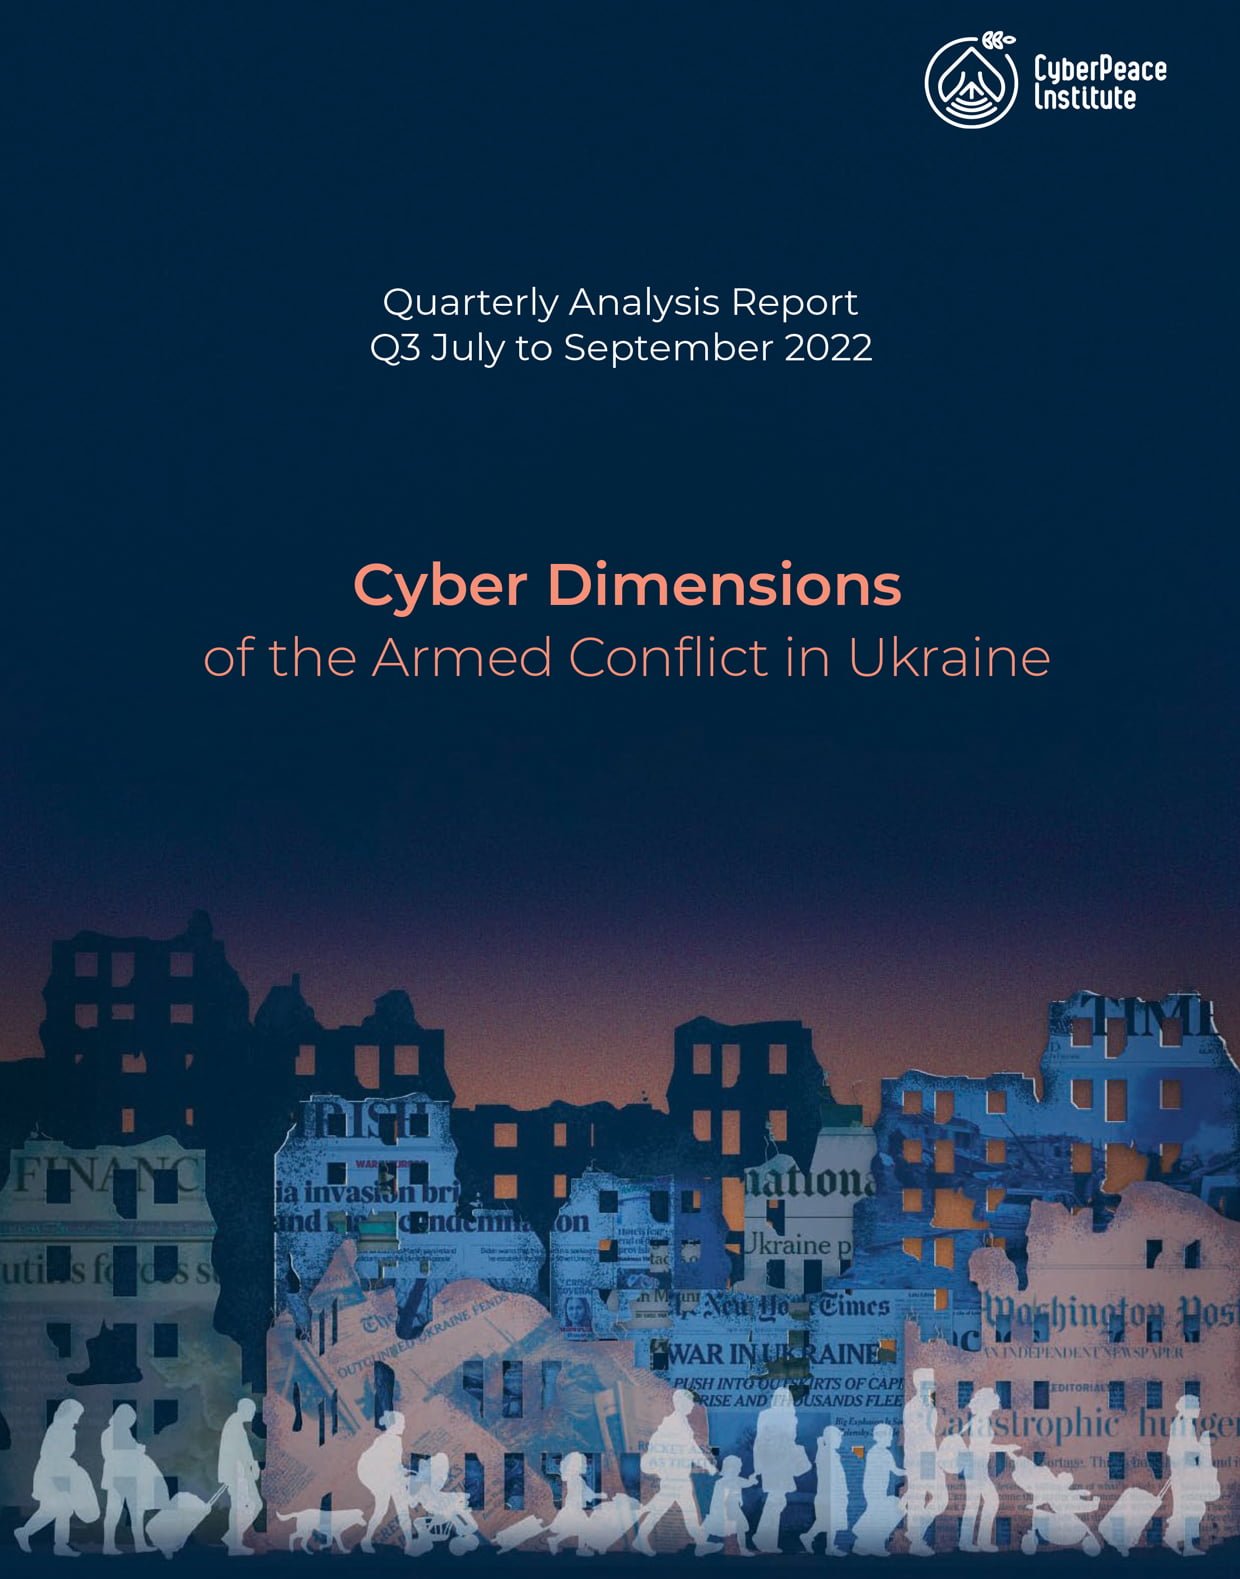 Cyber Dimensions of the Armed Conflict in Ukraine